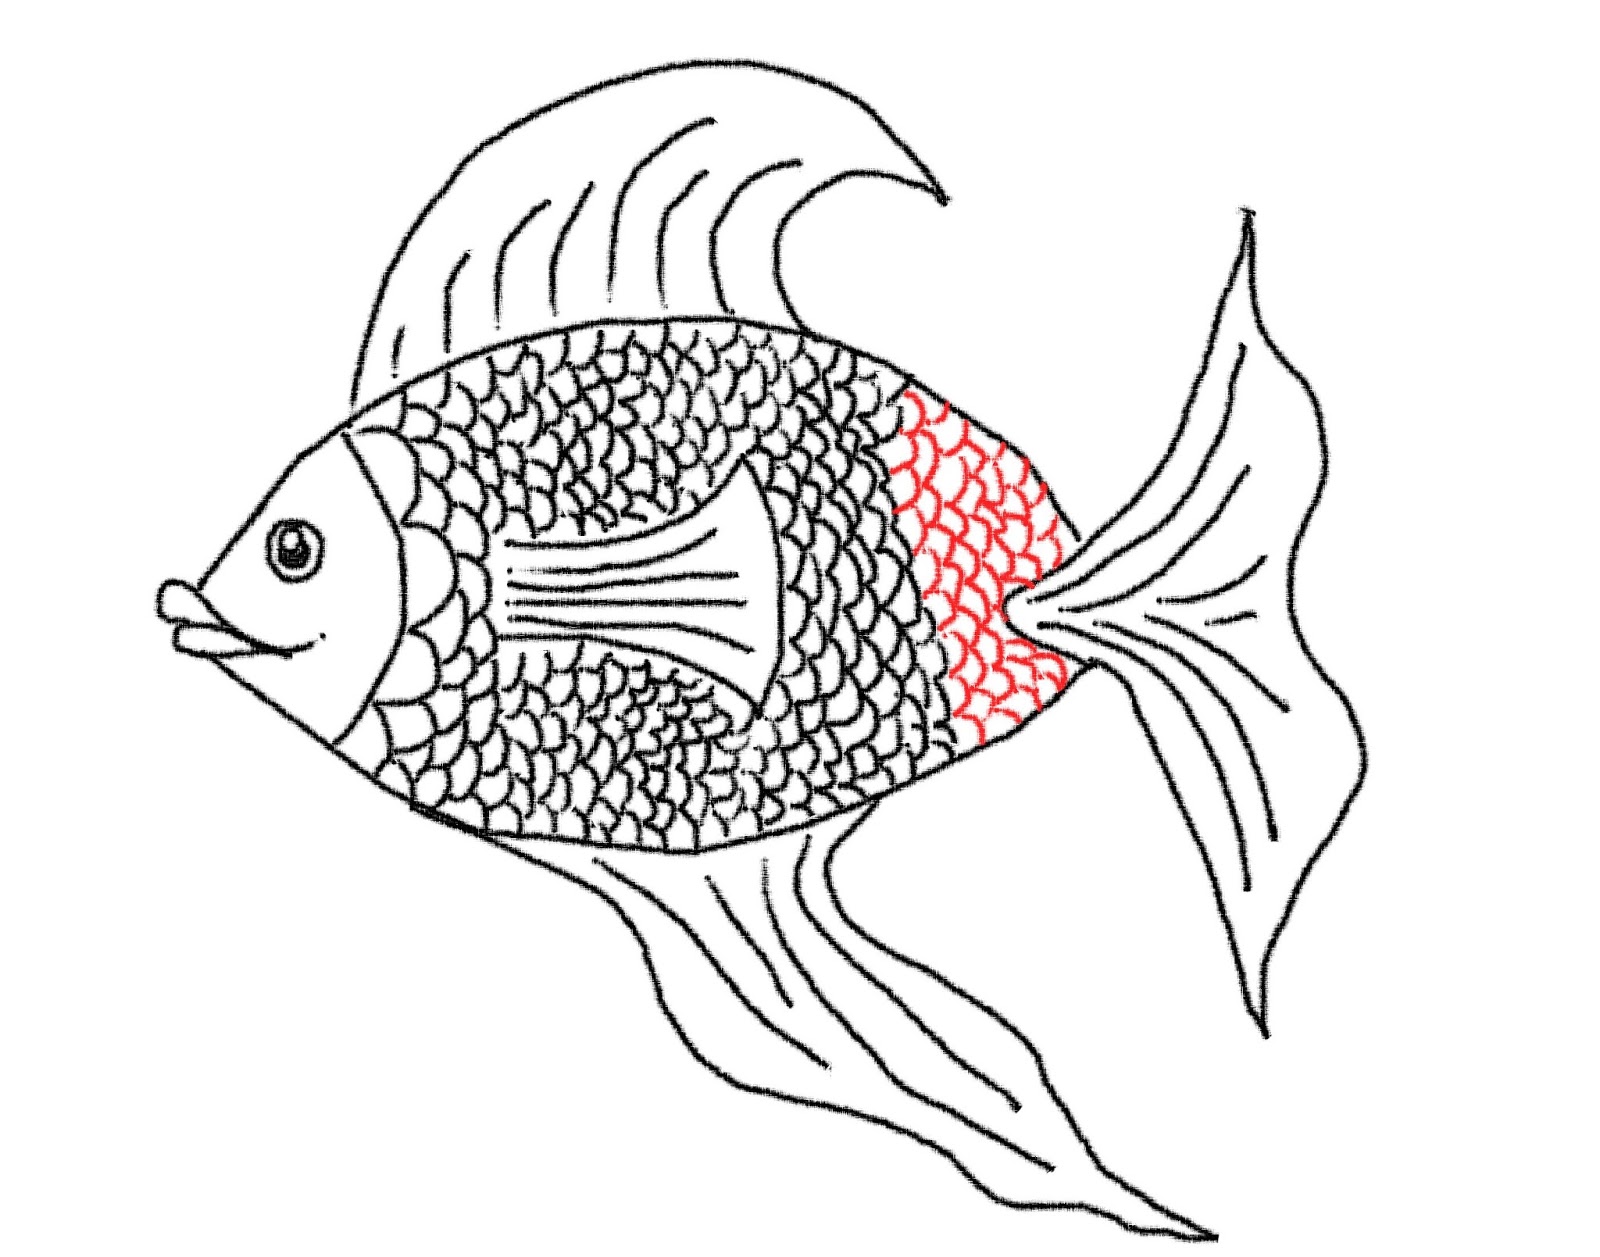 Line drawing of fish - nibhtposters